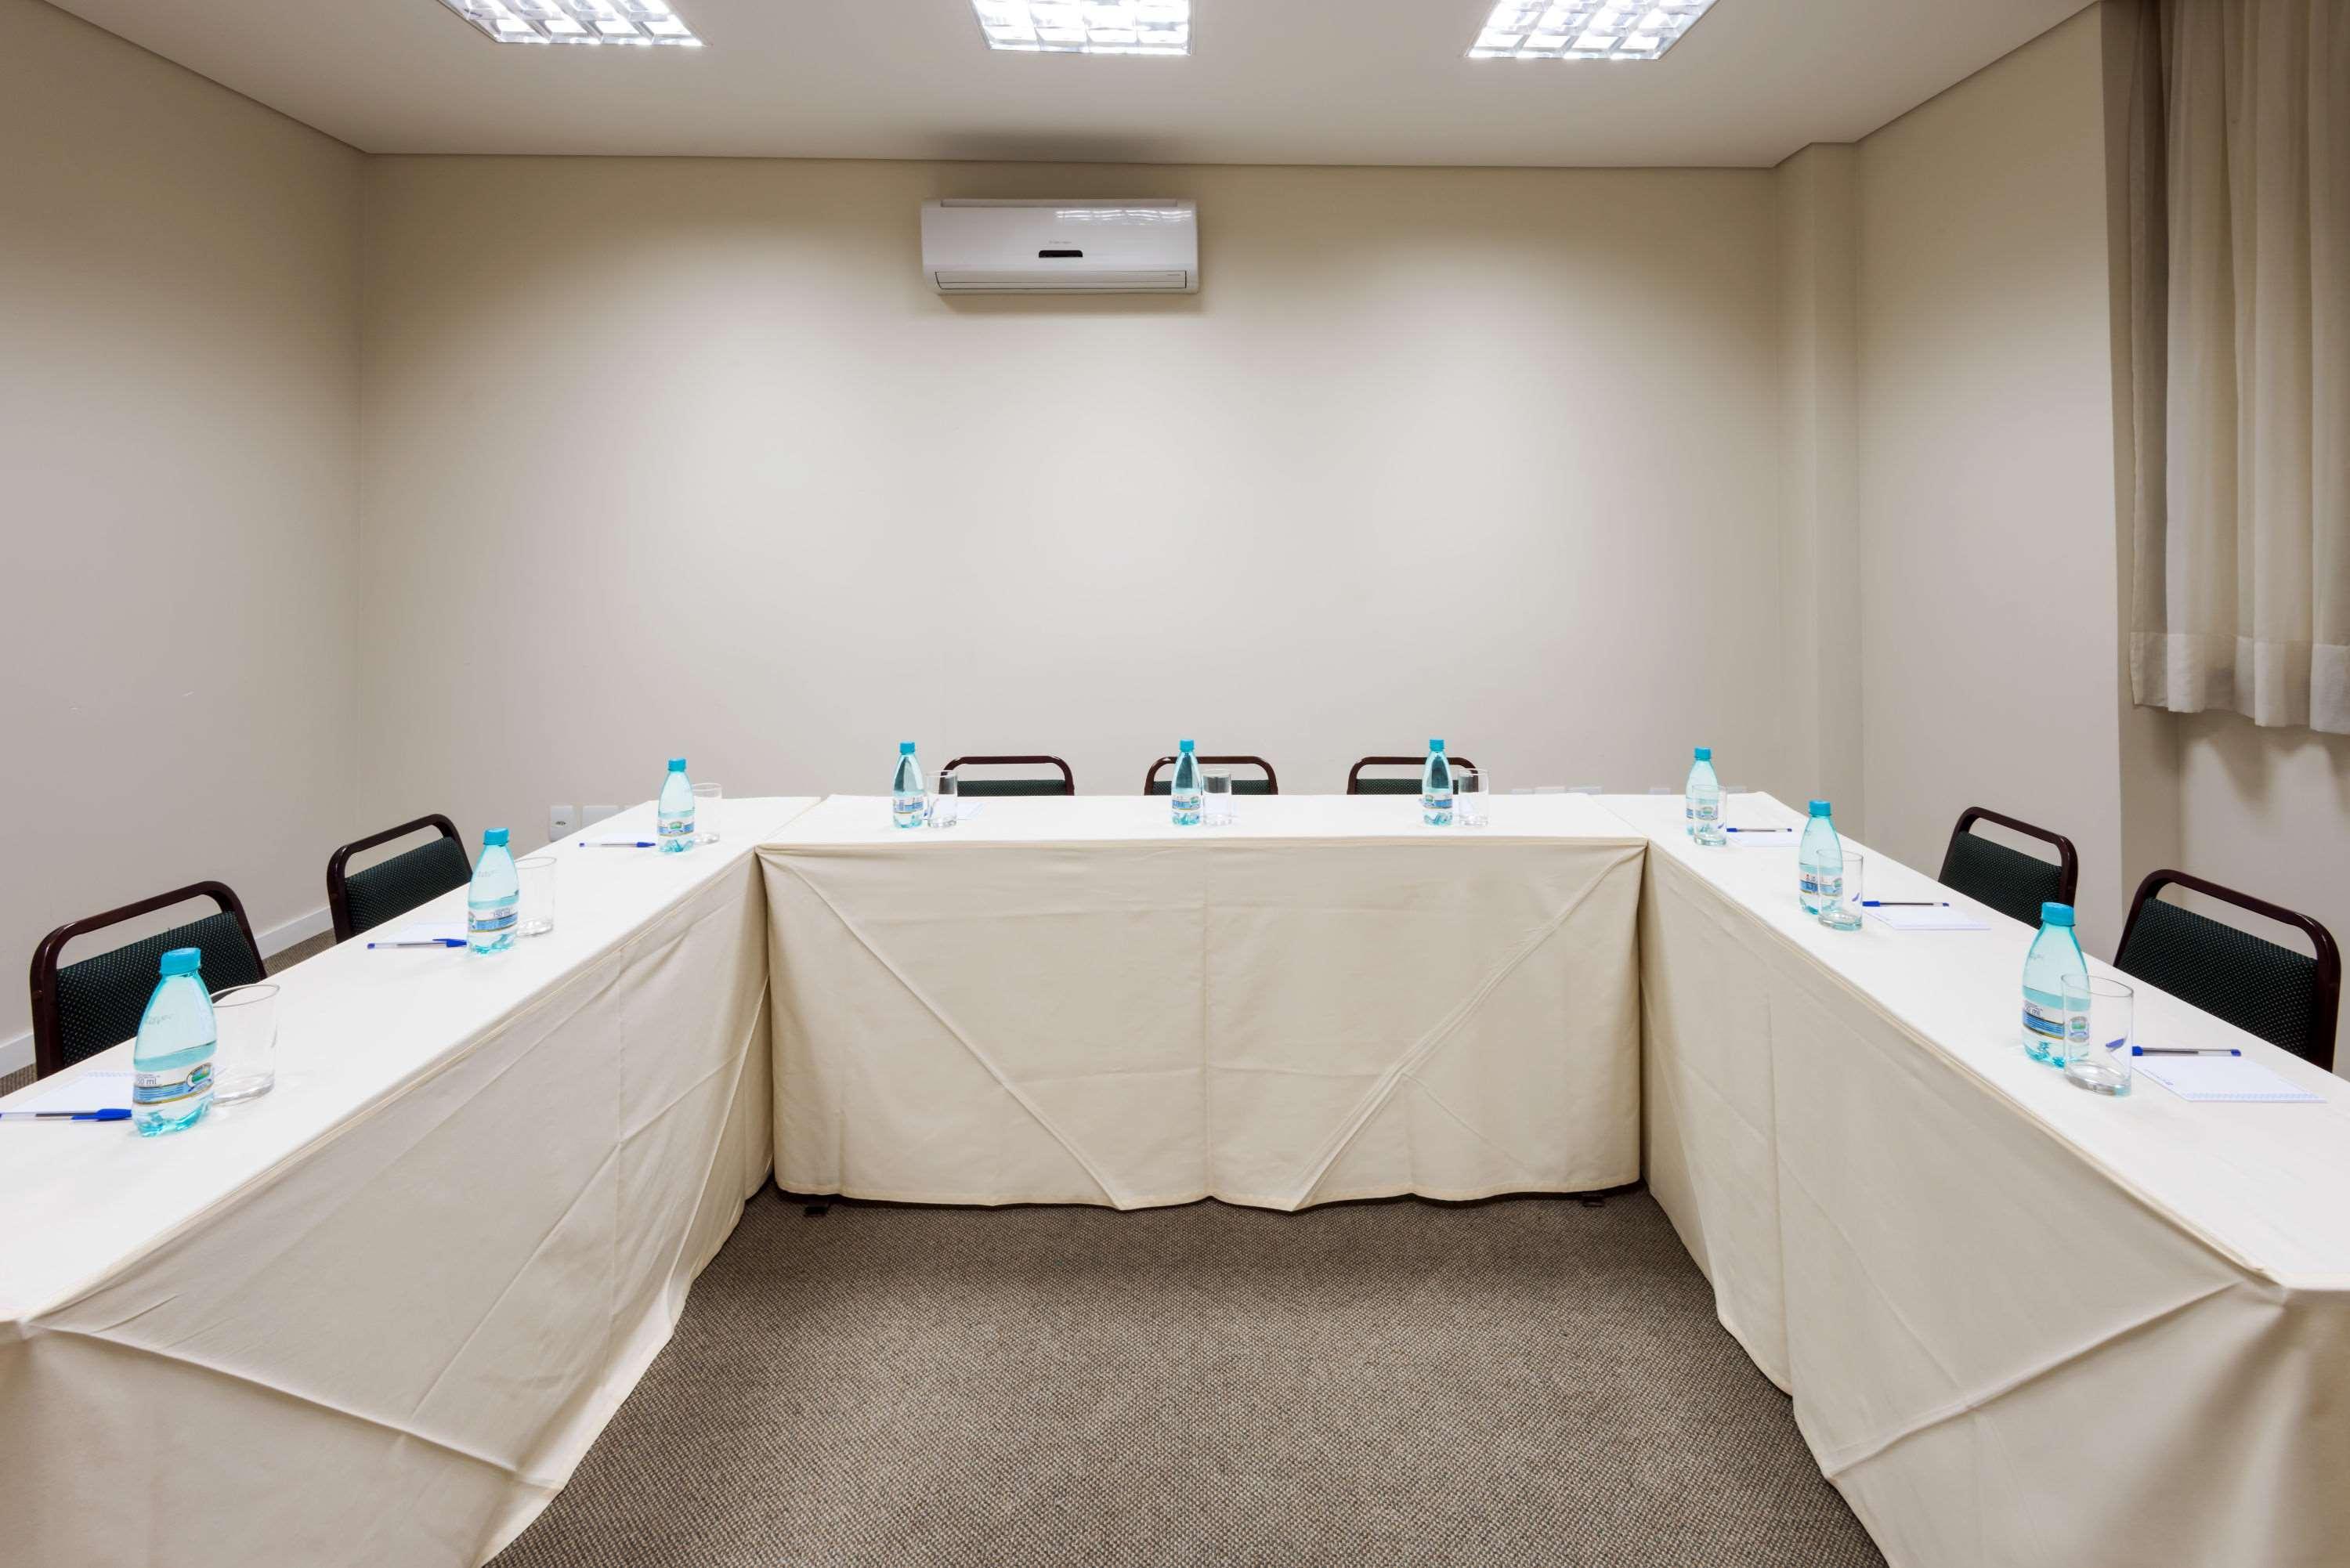 Foz do Iguacu, Brazil Event Space & Hotel Conference Rooms